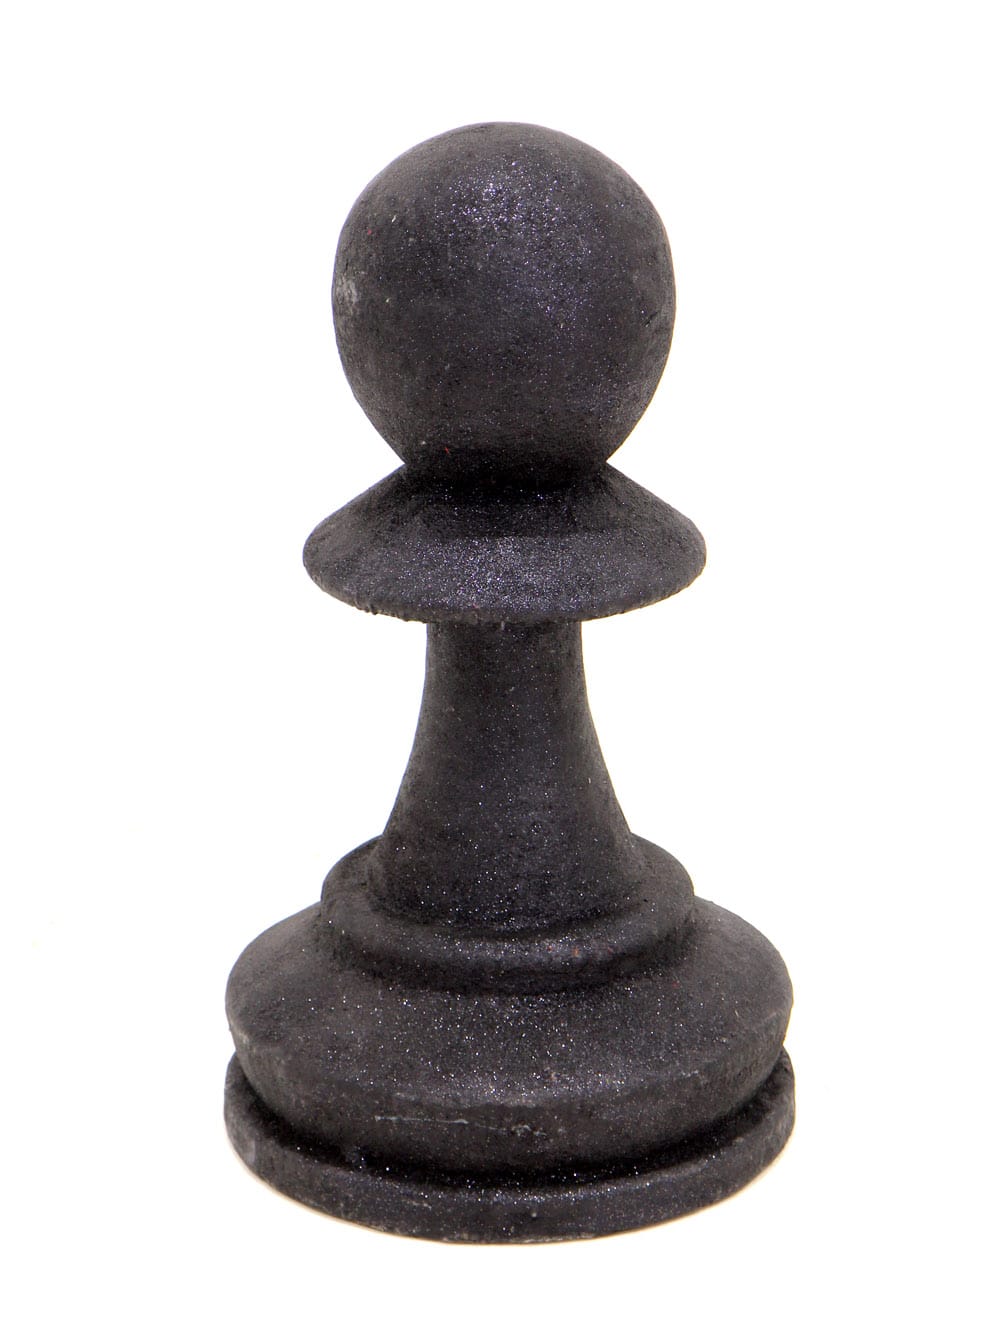 Giant Chess Piece Prop - Pawn | Event Prop Hire